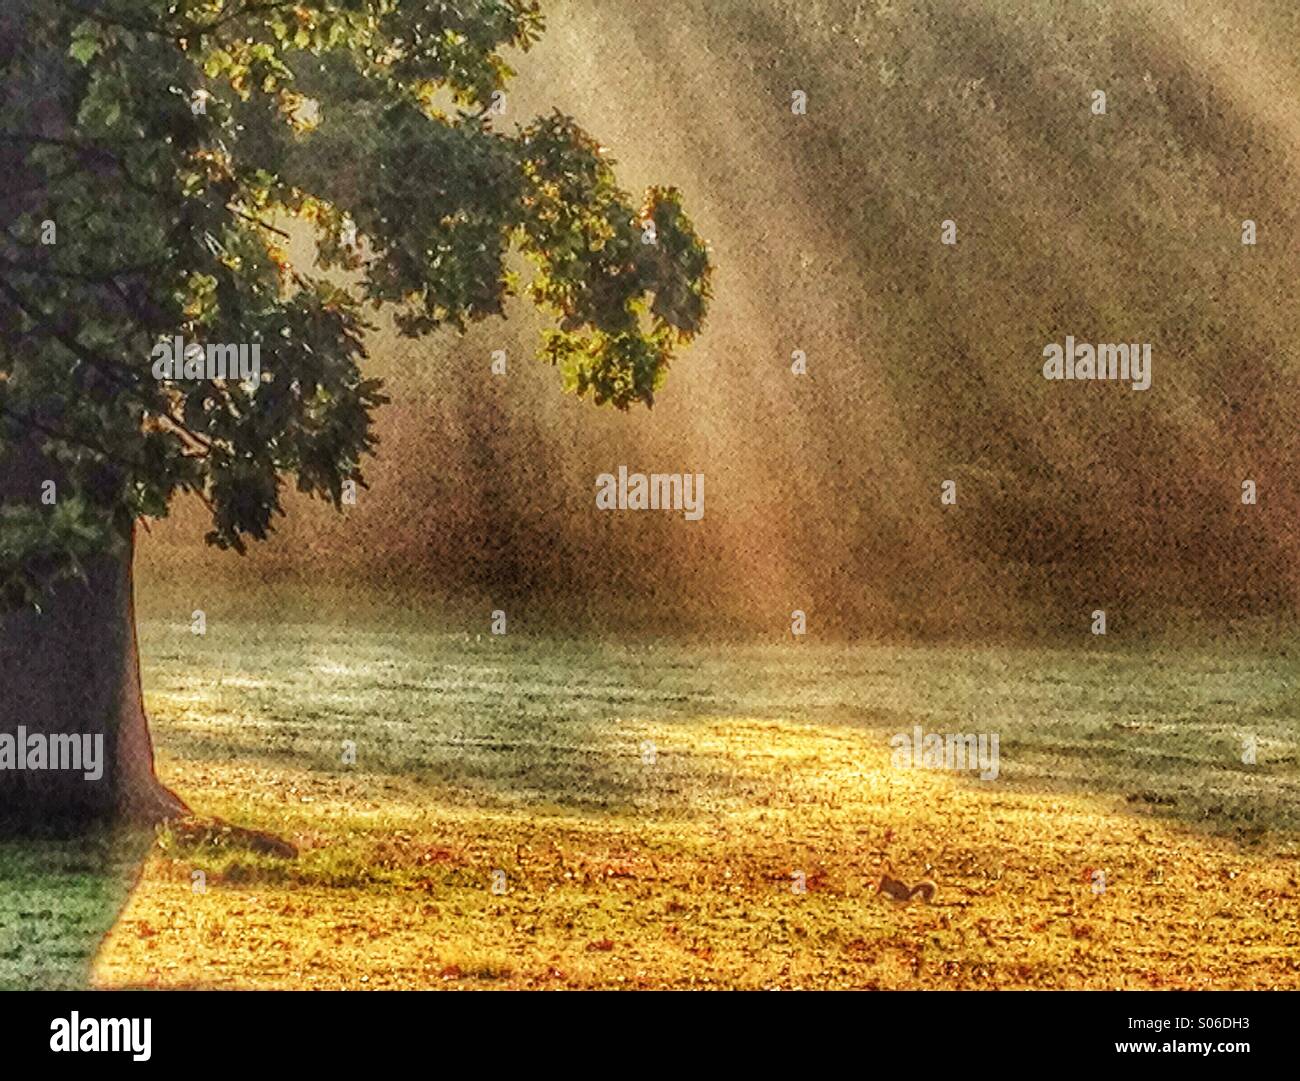 Tree in a park bathed in suns rays at sunrise Stock Photo